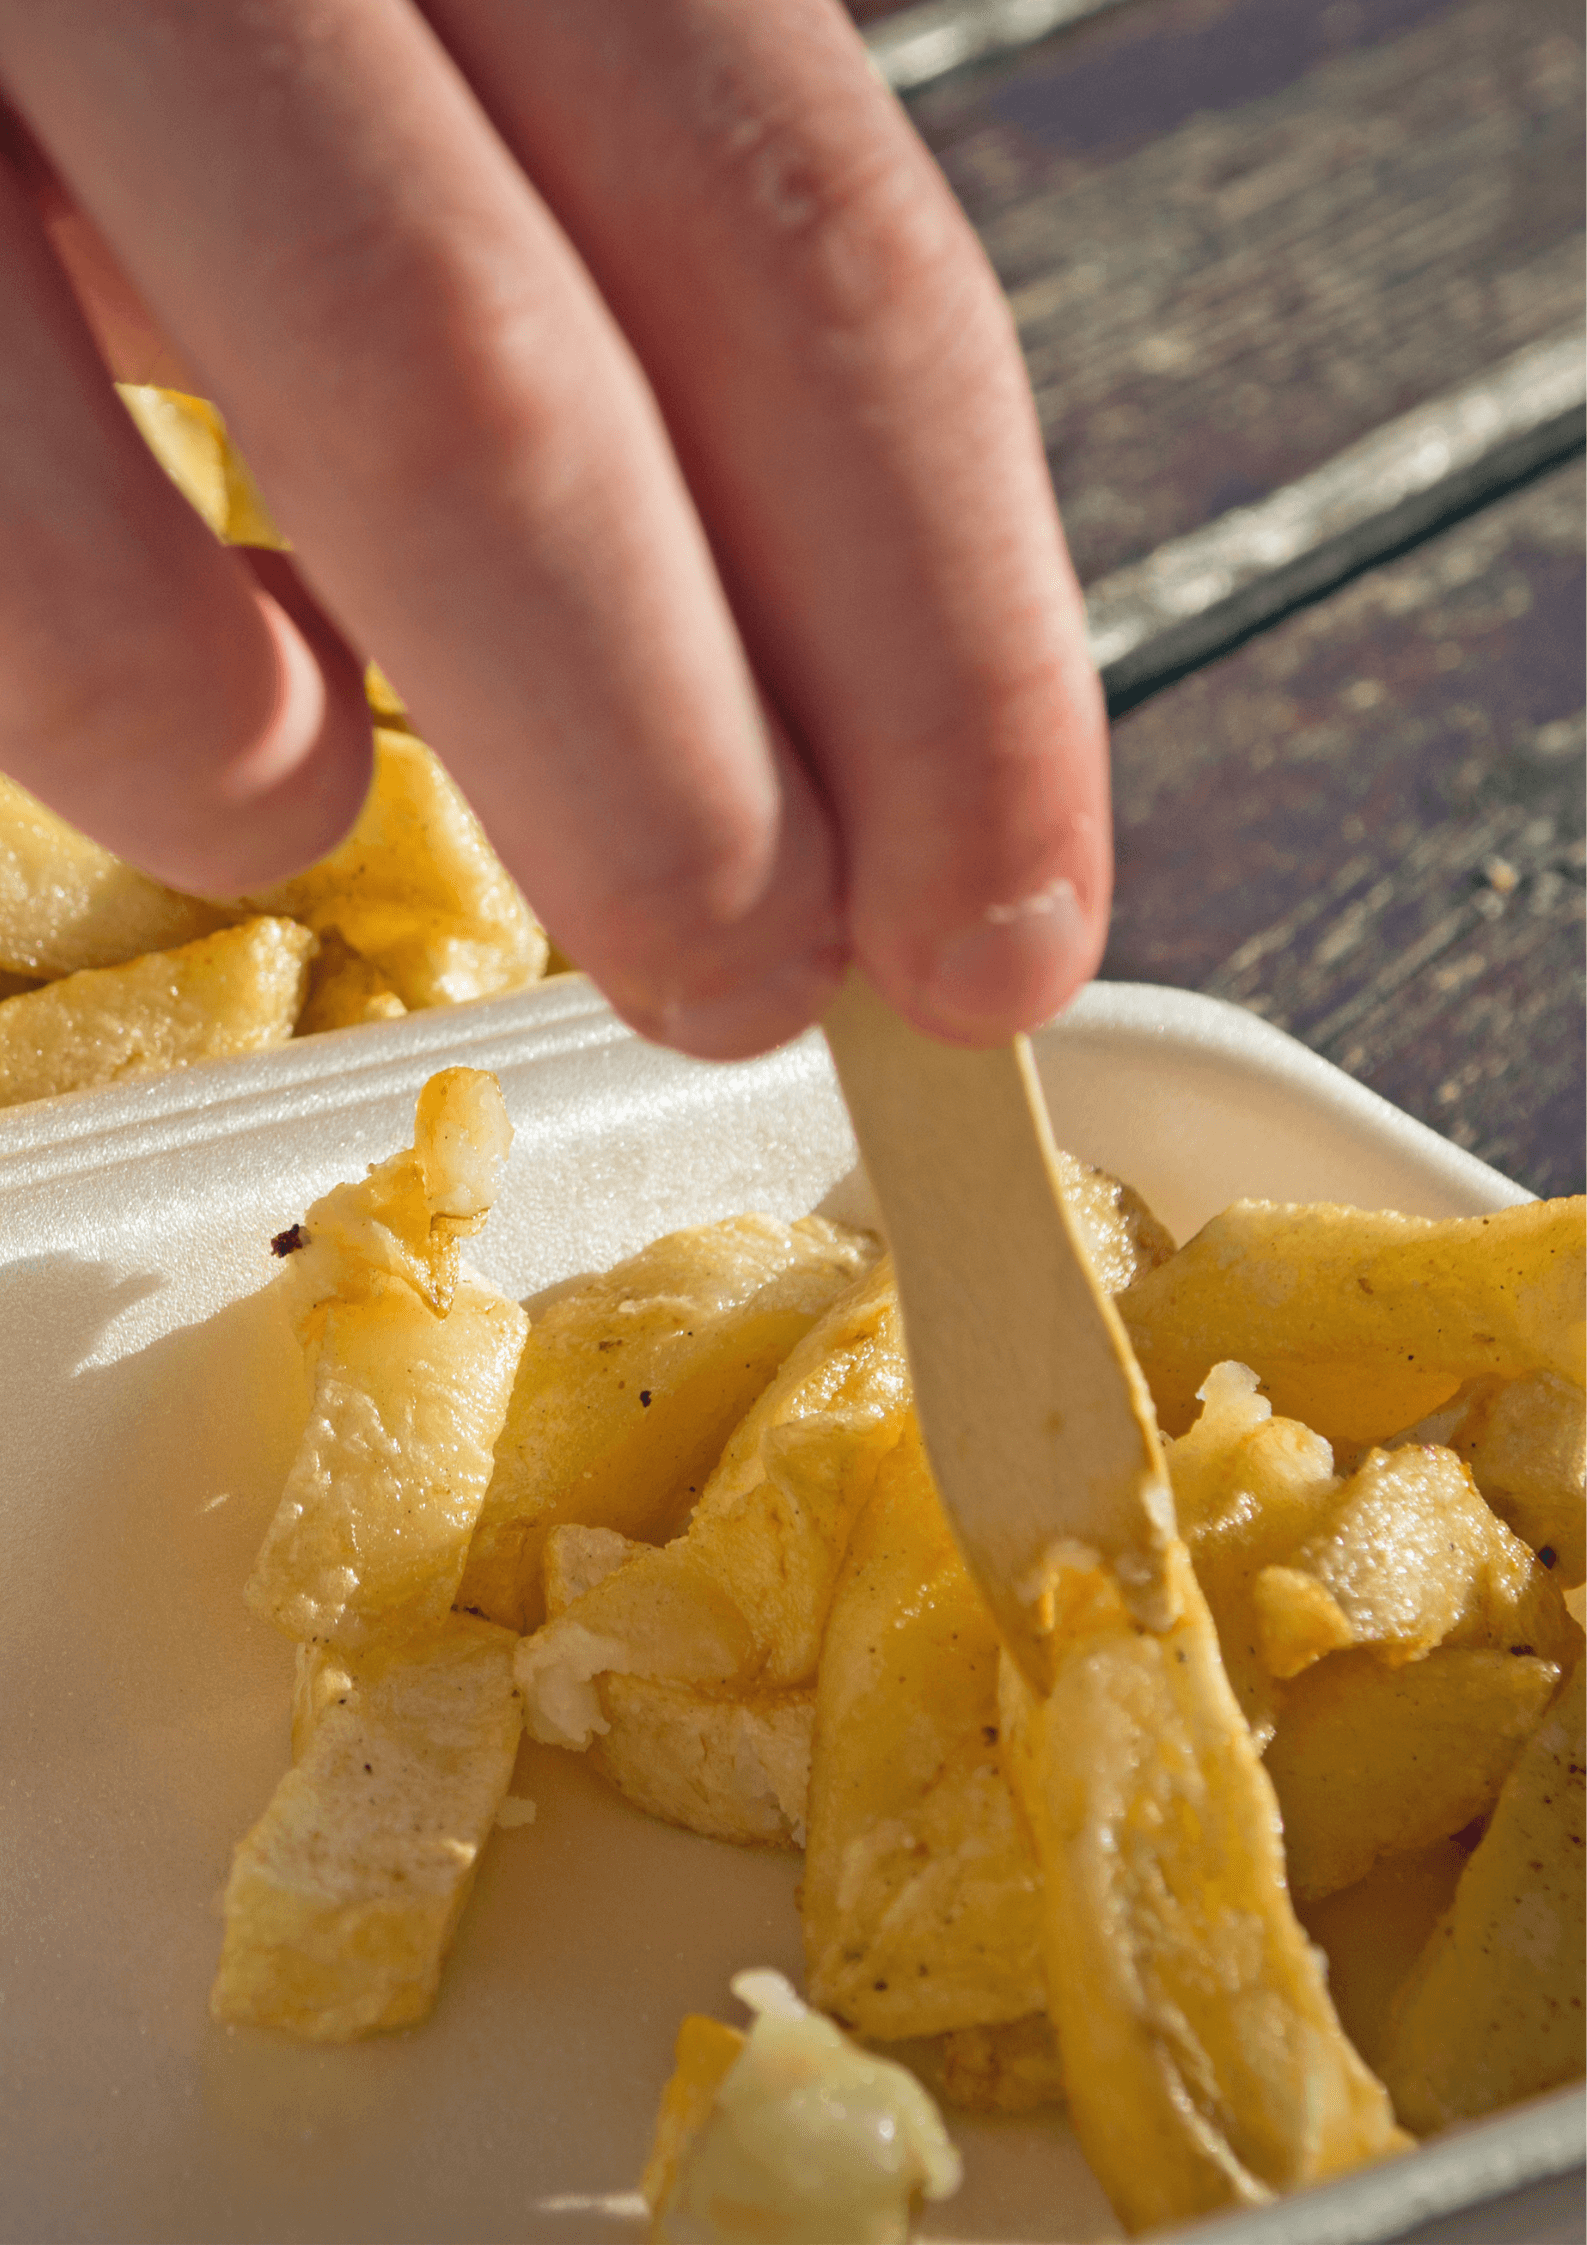 Chips from a chip shop in England, UK